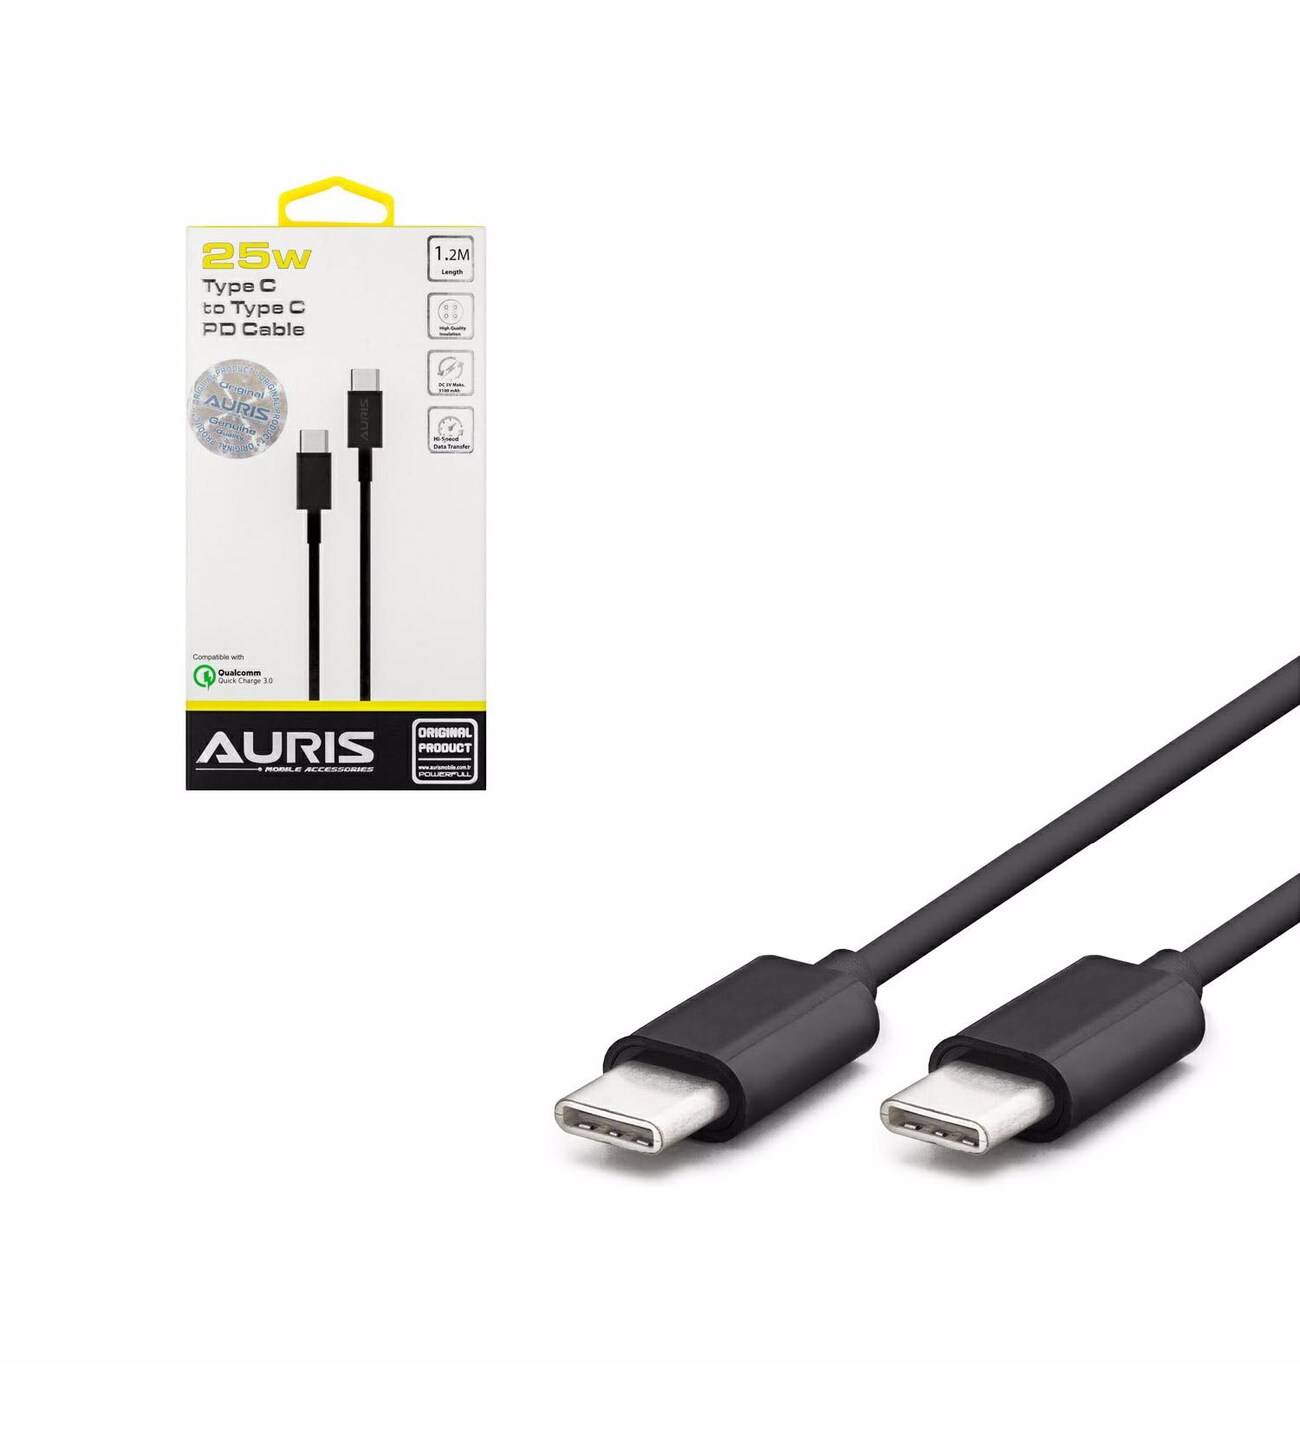 AURIS CABLE PD USB TYPE-C TO TYPE-C 3.0 25W 1.2MT ARS-CB18